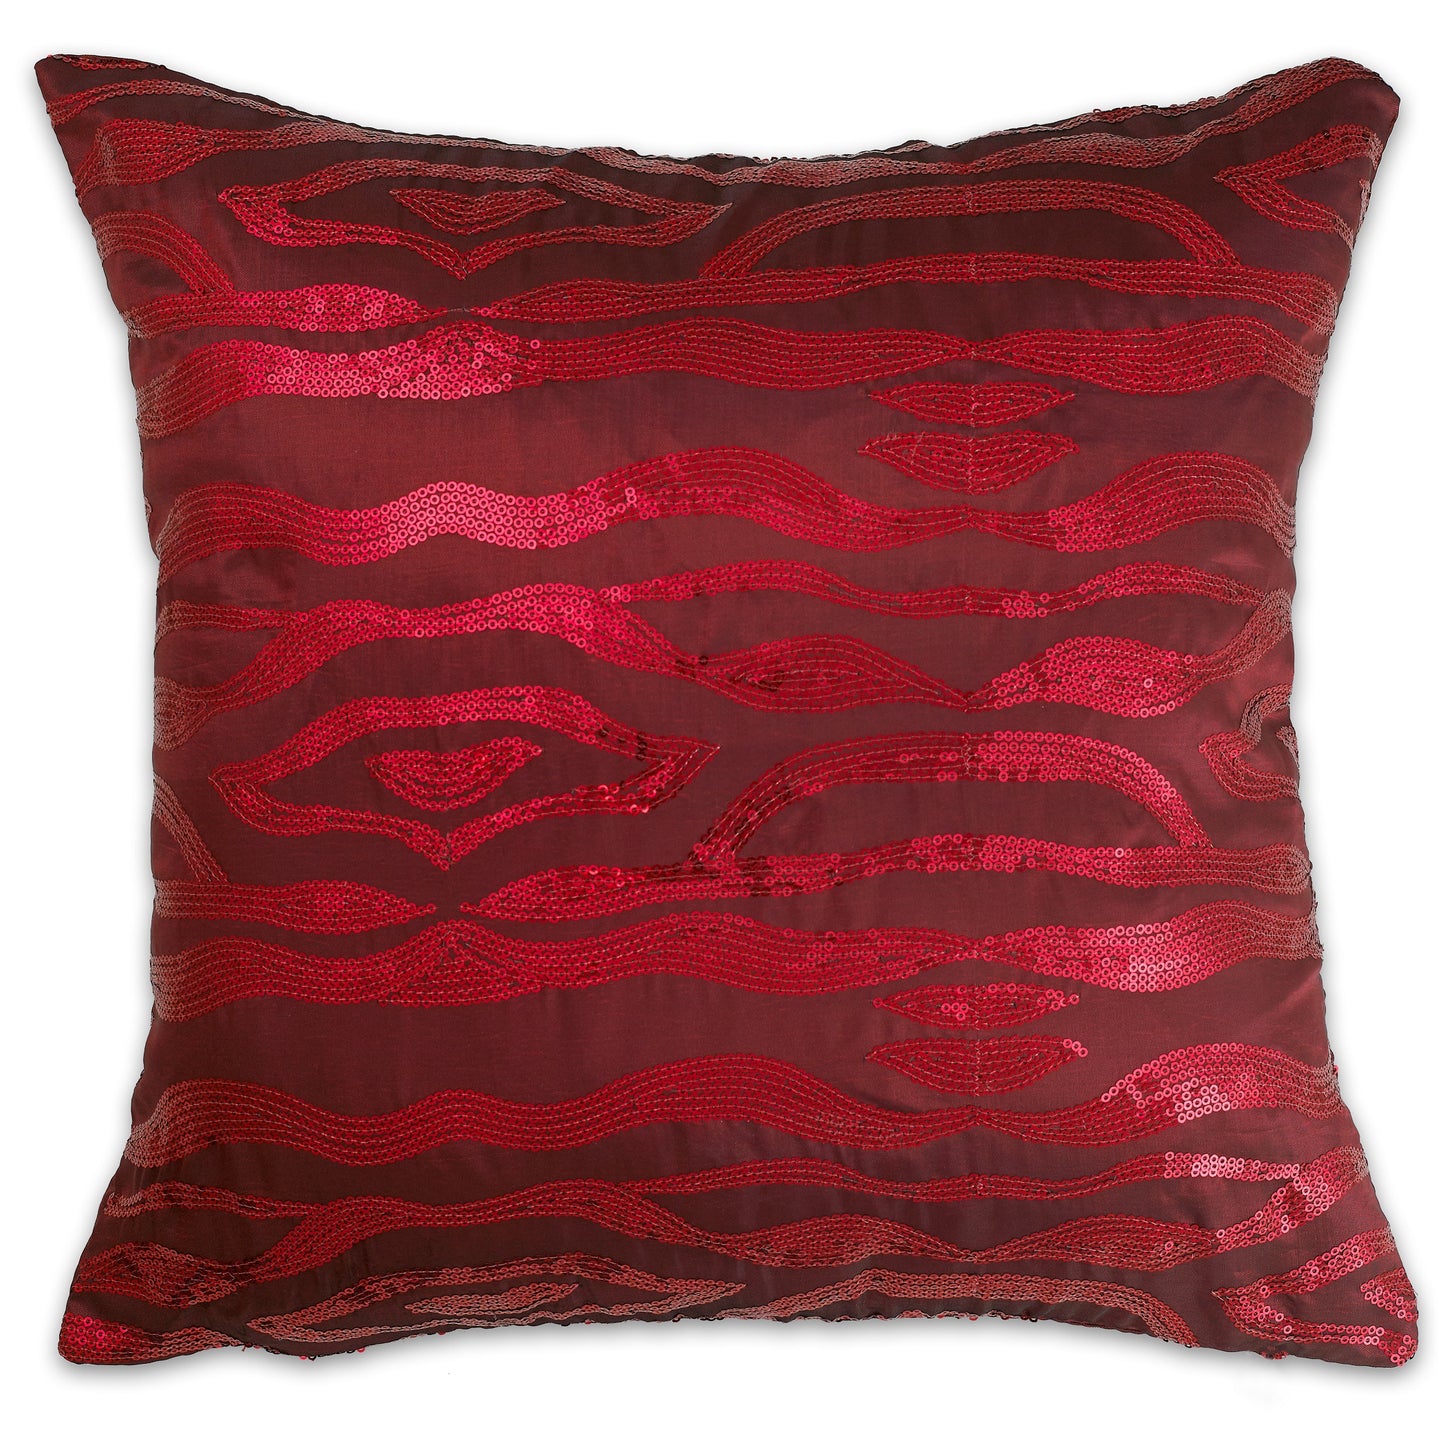 Marvelous Embroidered Sequins Decorative Accent Throw Pillow